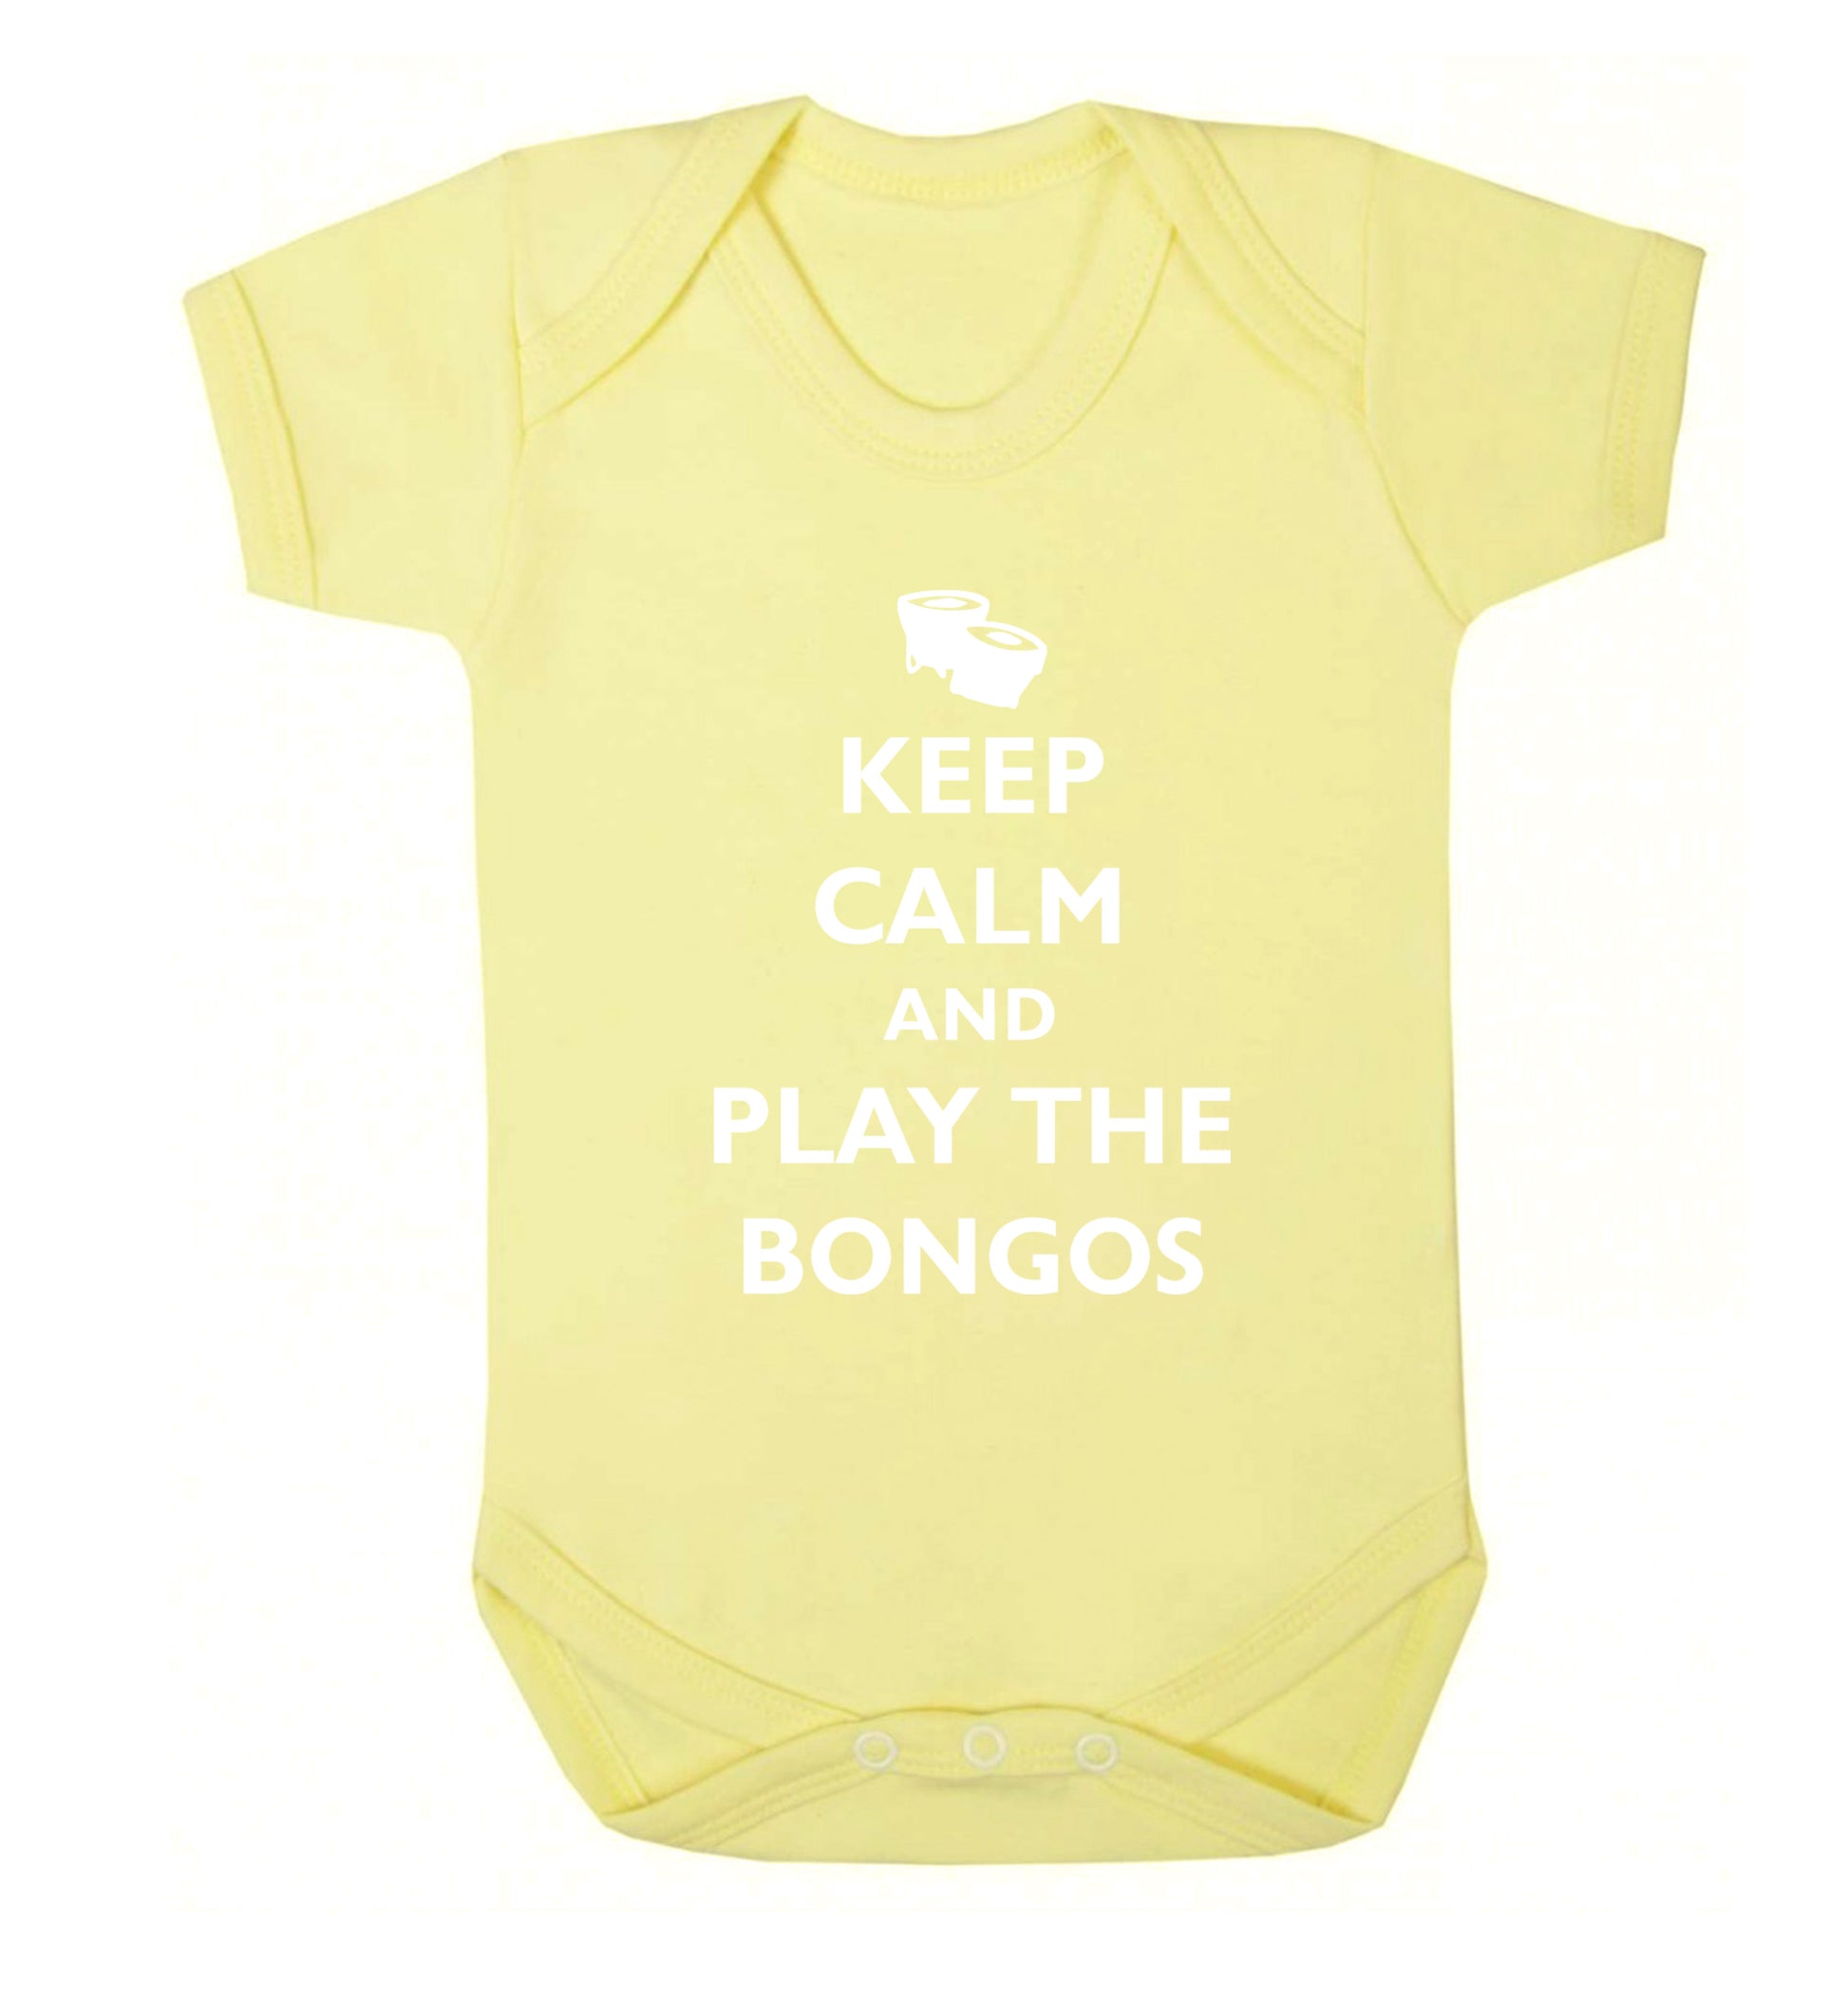 Keep calm and play the bongos Baby Vest pale yellow 18-24 months